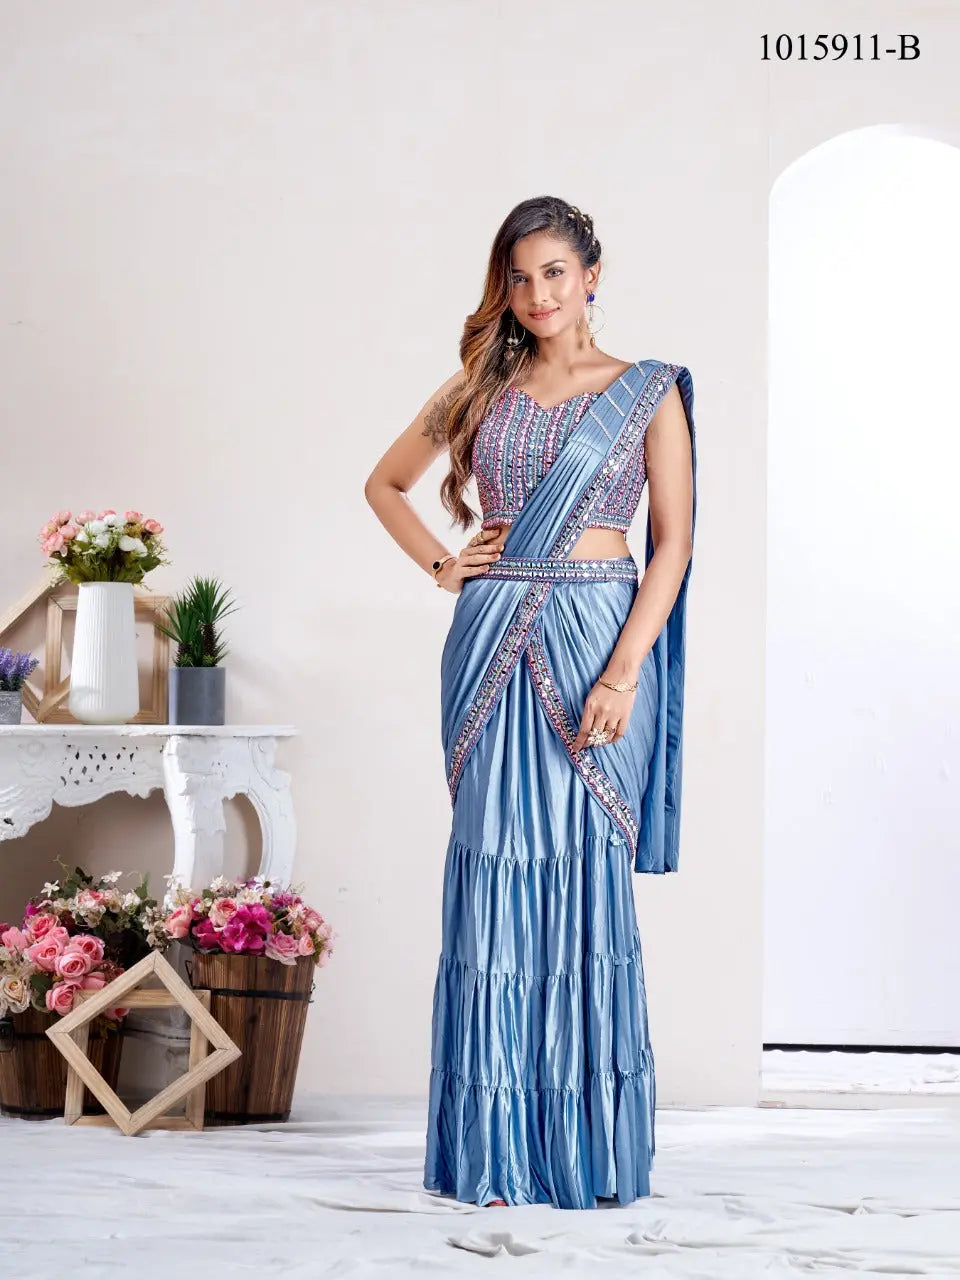 Party Wear Ready To Wear Saree at Rs 2095.00, Fancy Sarees